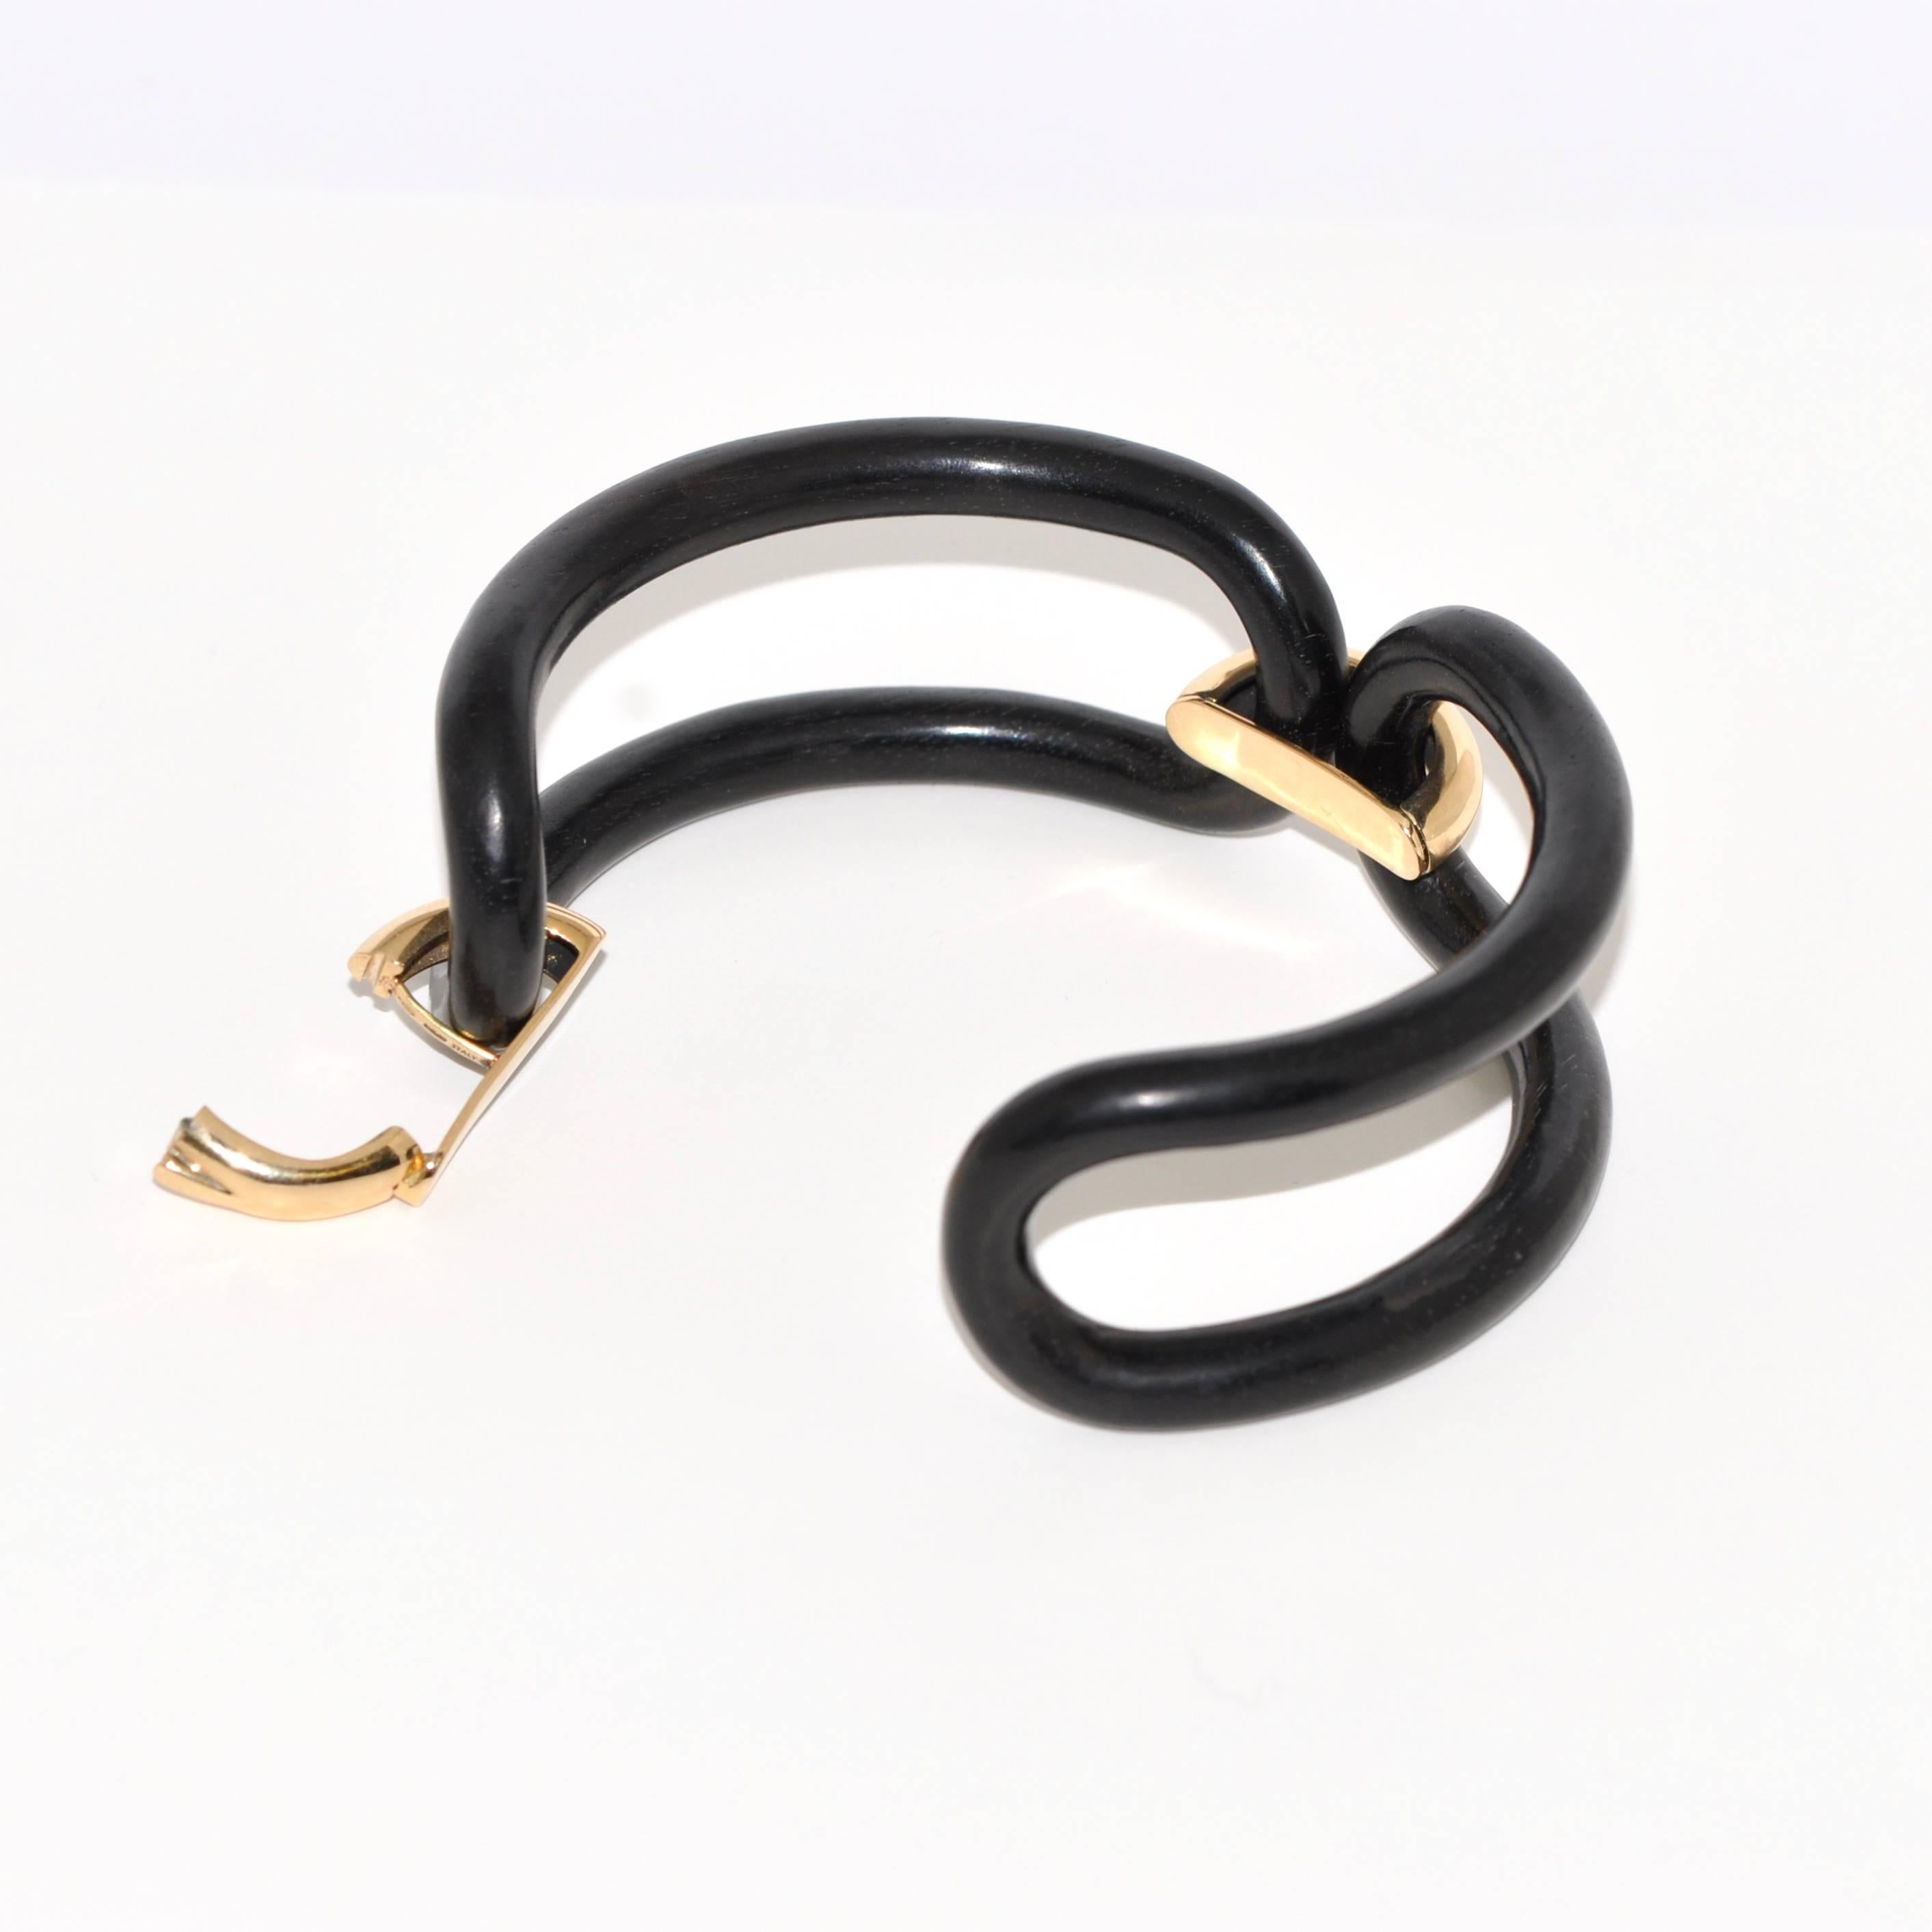 Discover this Ebony Wood and Yellow Gold 11.6 gr Articulated Bracelet.
Ebony Wood
Yellow Gold 18 Carat
Yellow Gold 18 Carat Clasp
Artisanal Manufacture